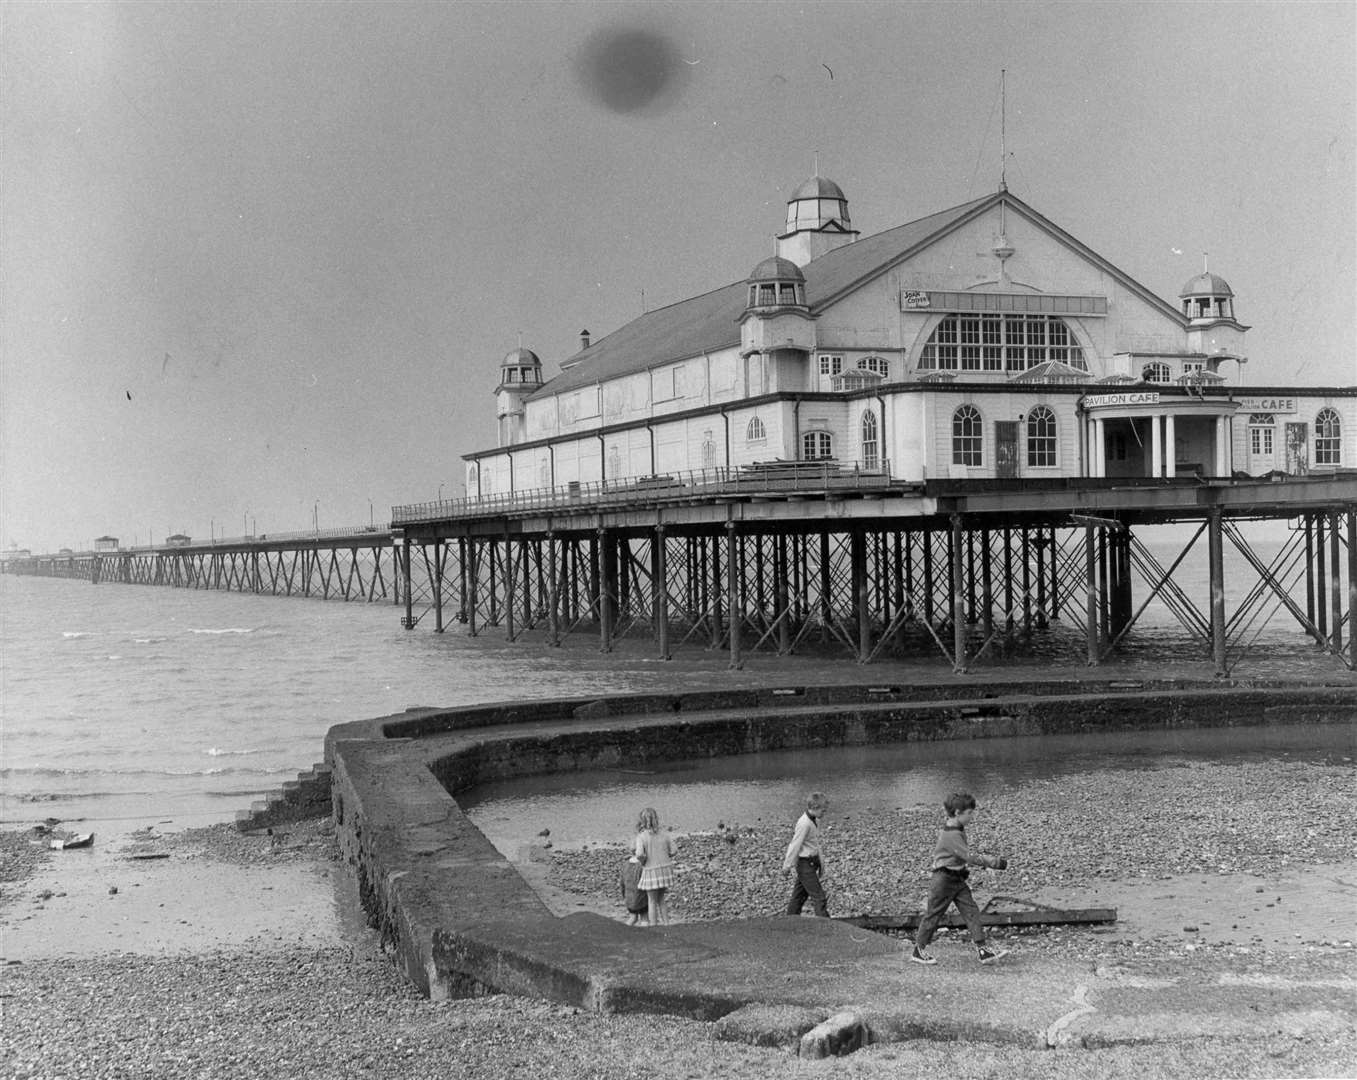 Herne Bay Pier pictured in 1970